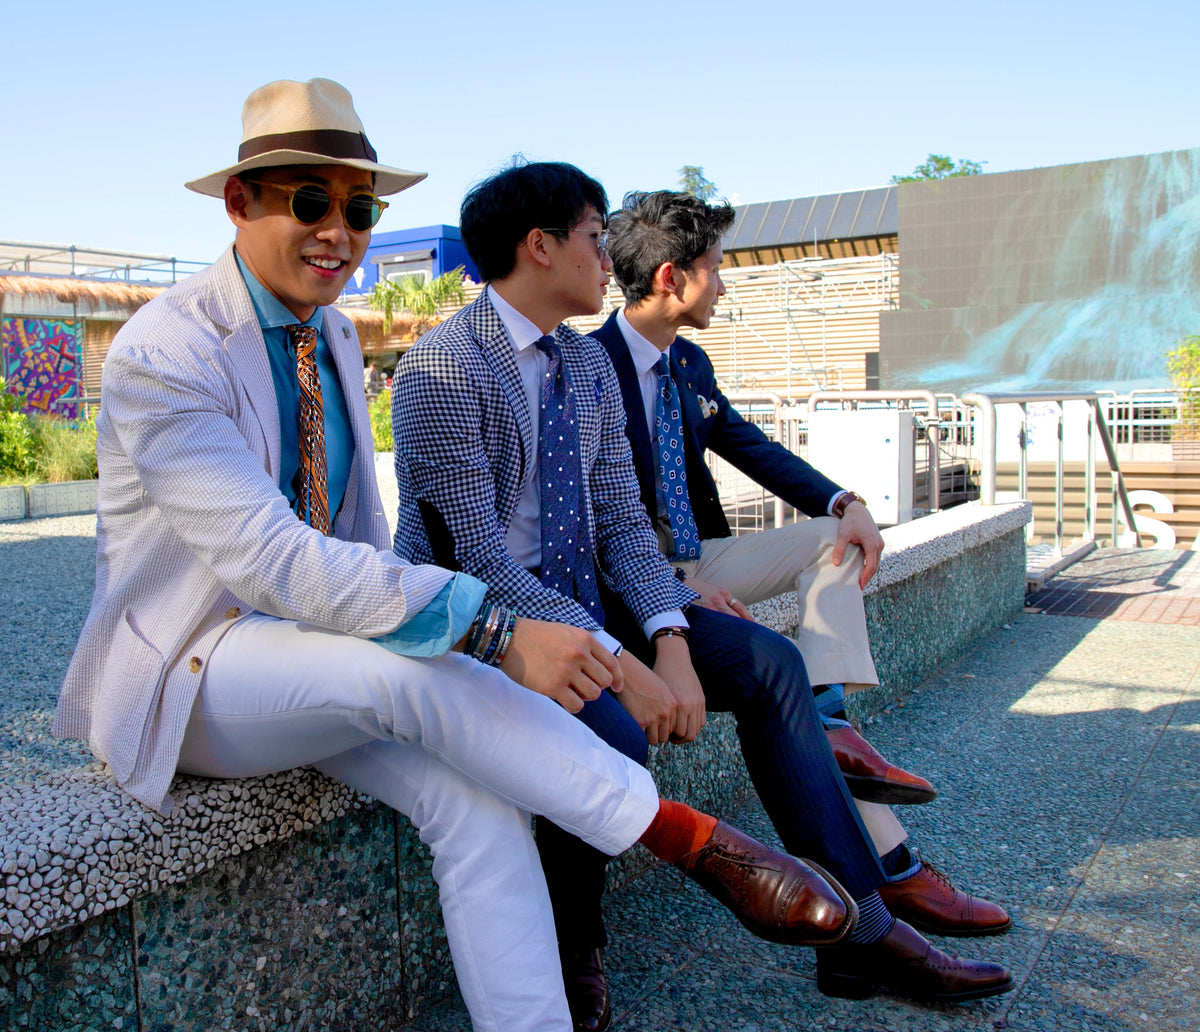 In conversation with H. N. Tiong: Navigating the complex Concours of Neckties!